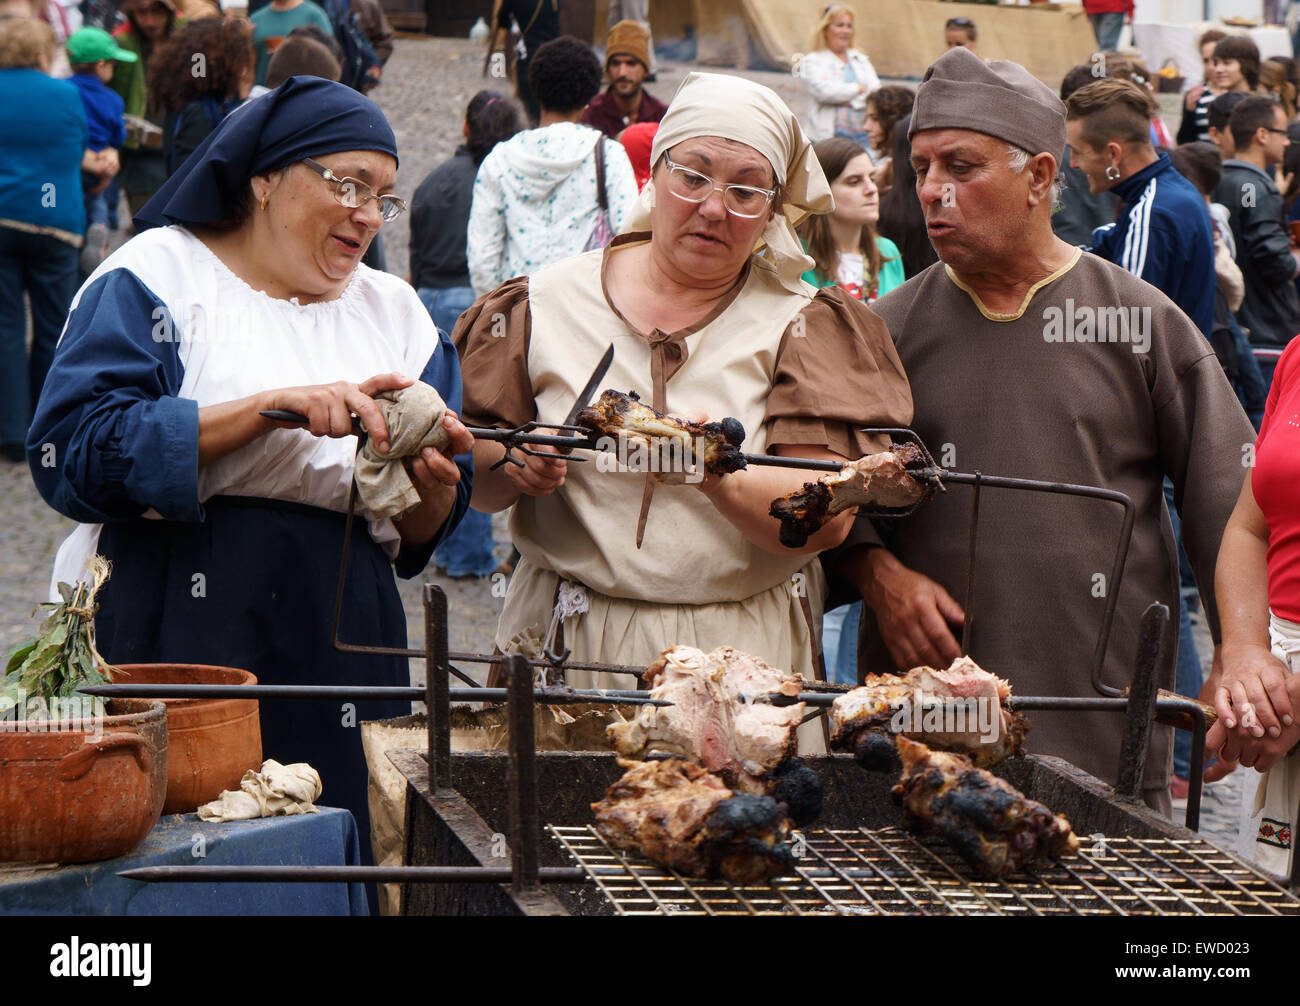 People dressed in medieval clothing roasting meat during a renaissance fair in Coimbra, Portugal, Europe Stock Photo